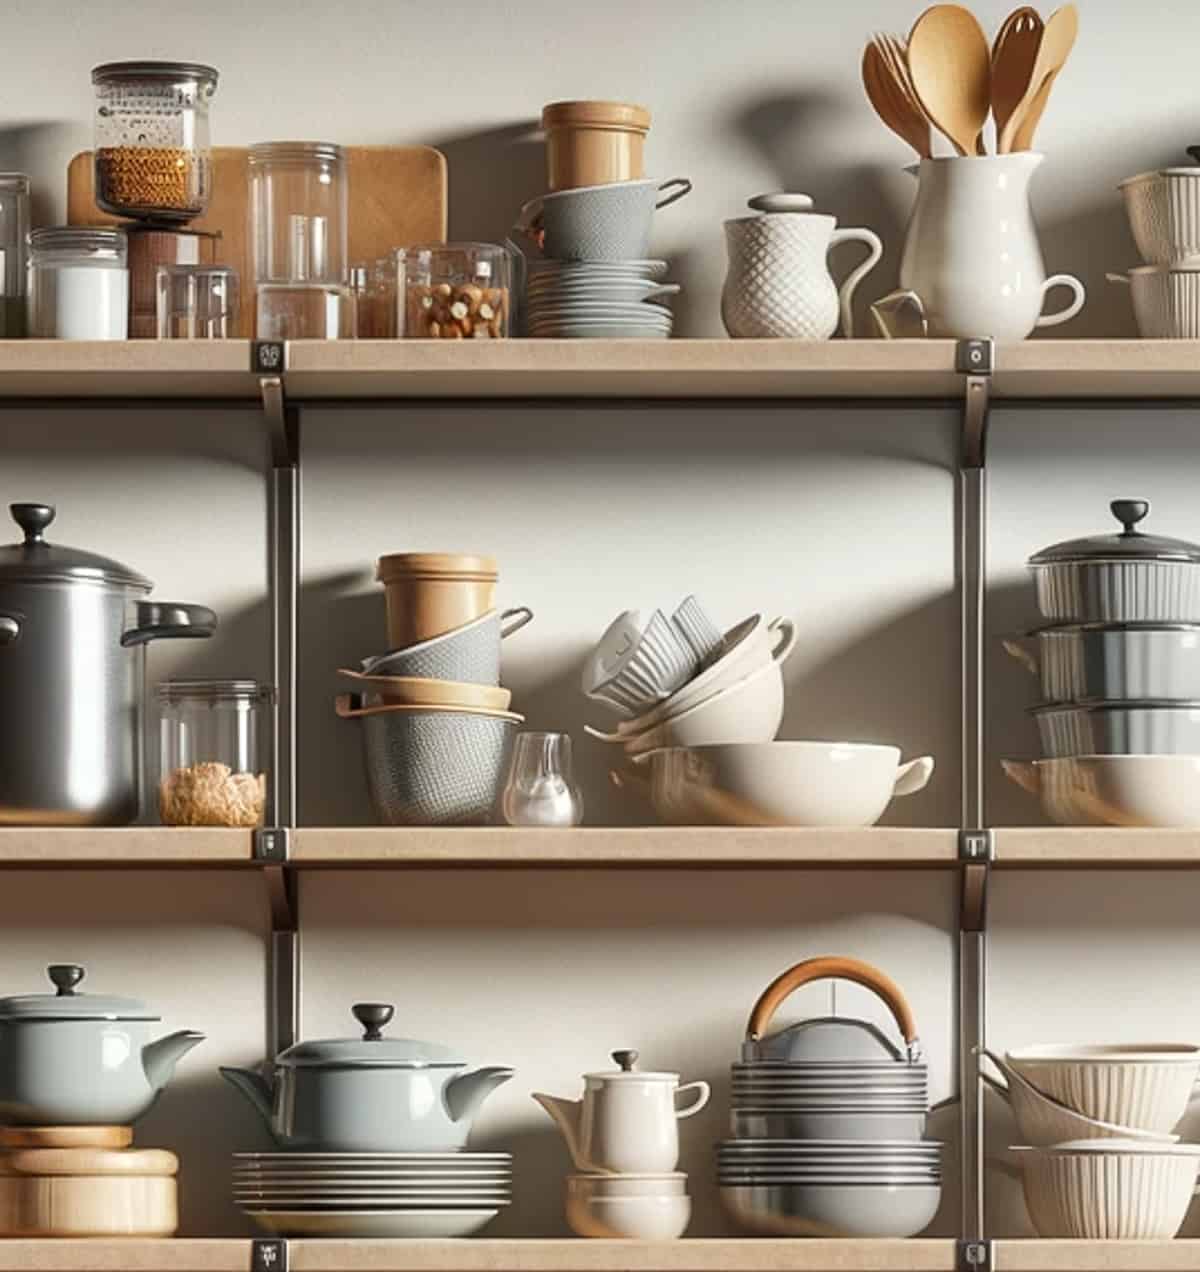 open wood kitchen shelves filled with gray and white dishes and cooking pots